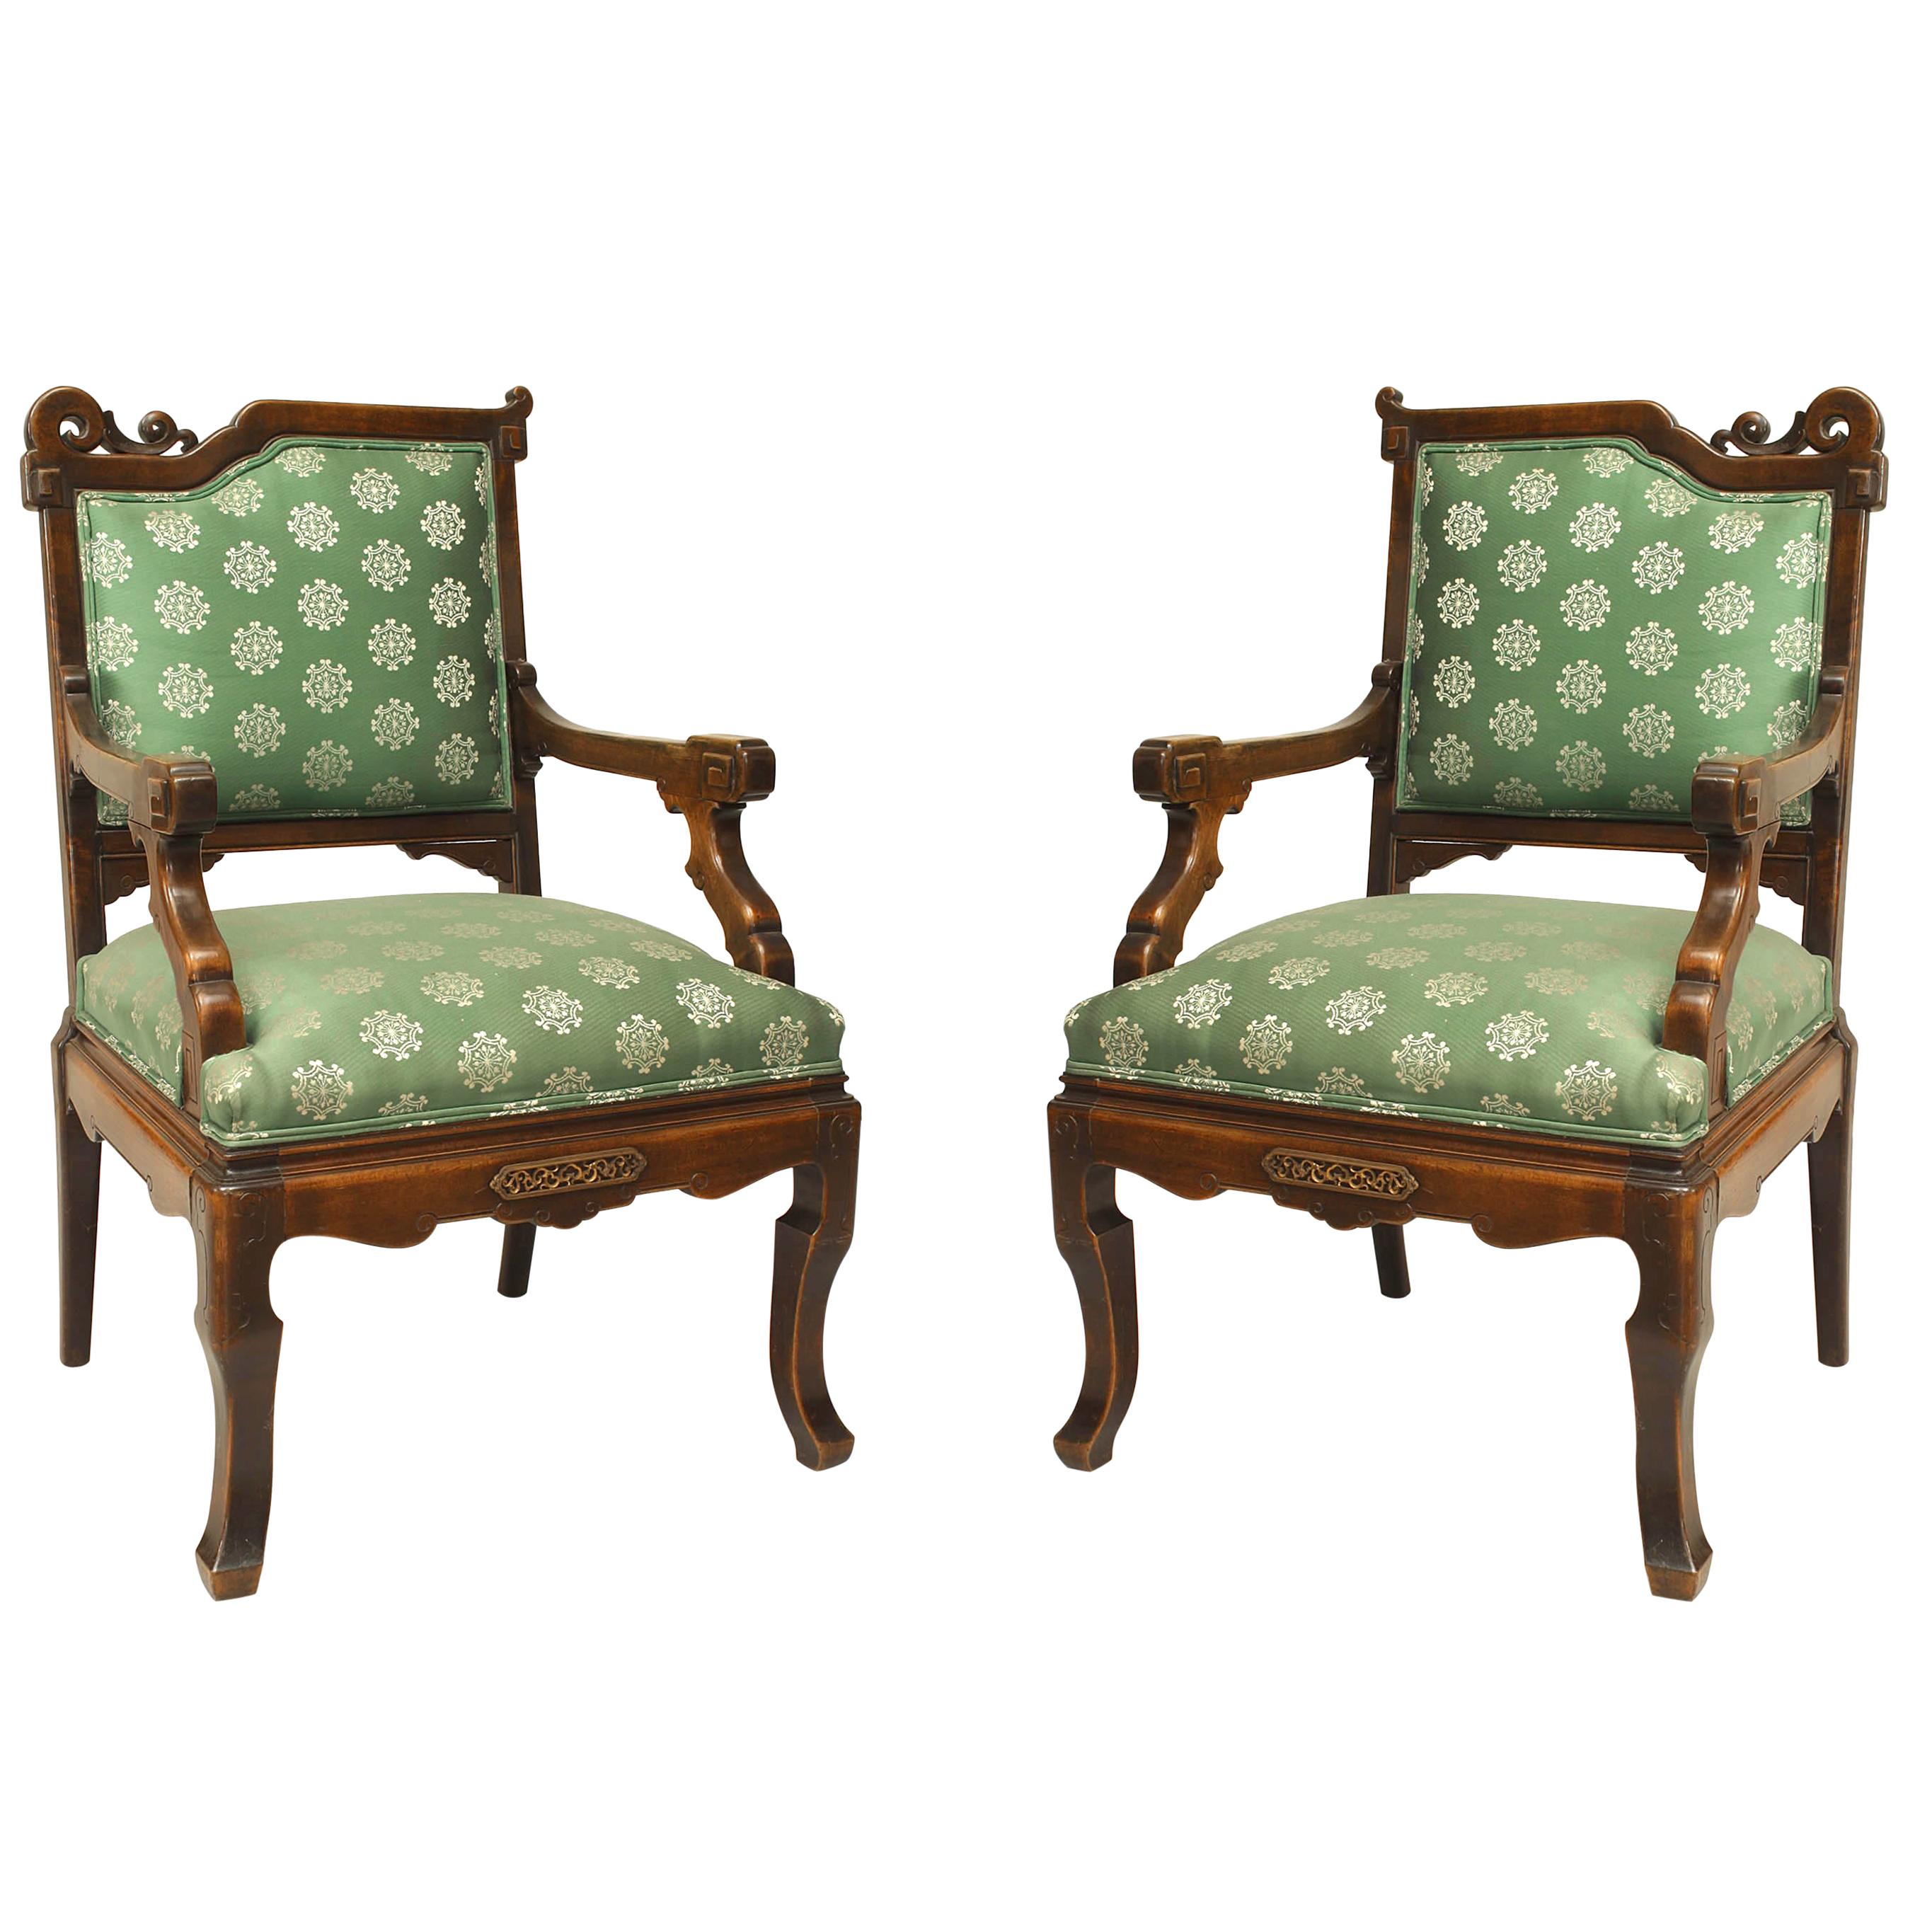 Pair of Viotdot English Regency Chinoiserie Mahogany Green Upholstered Armchairs For Sale